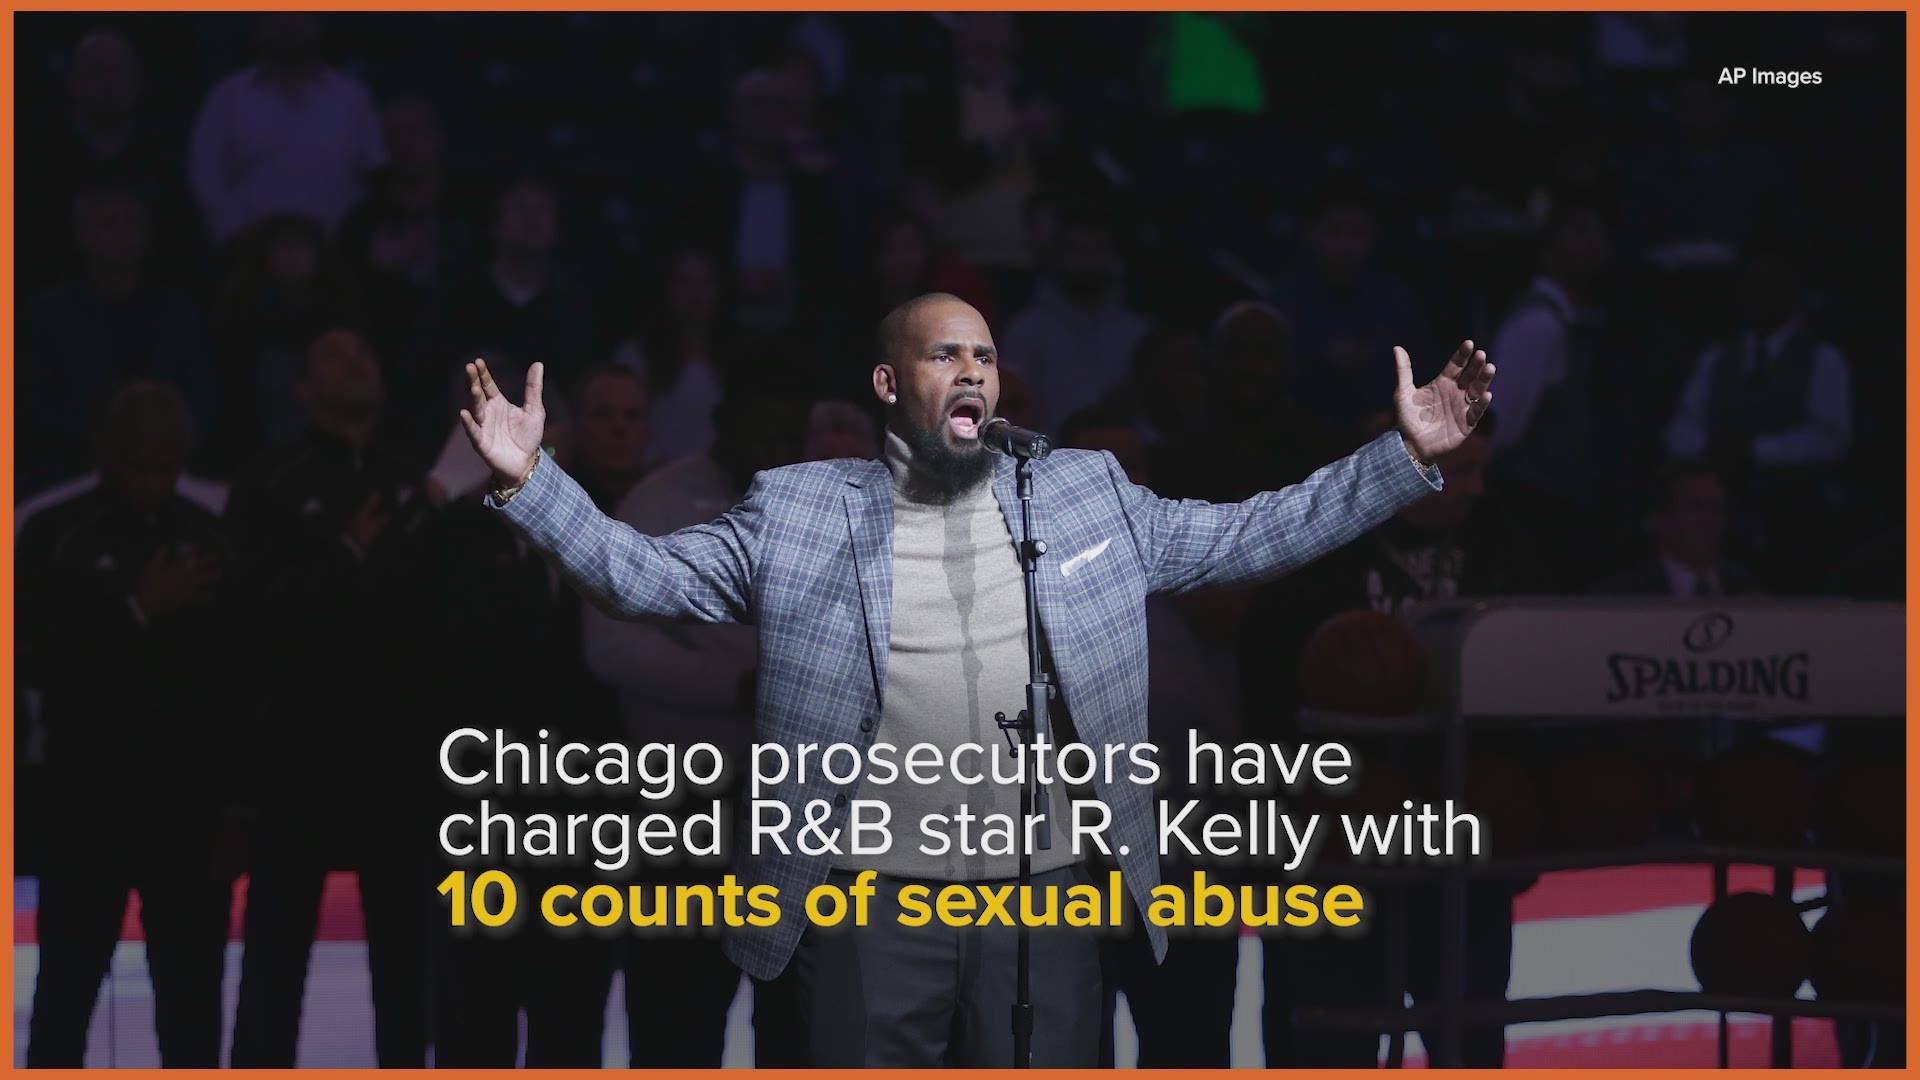 Chicago prosecutors have charged R&B star R. Kelly with aggravated sexual abuse involving multiple victims, court records revealed.